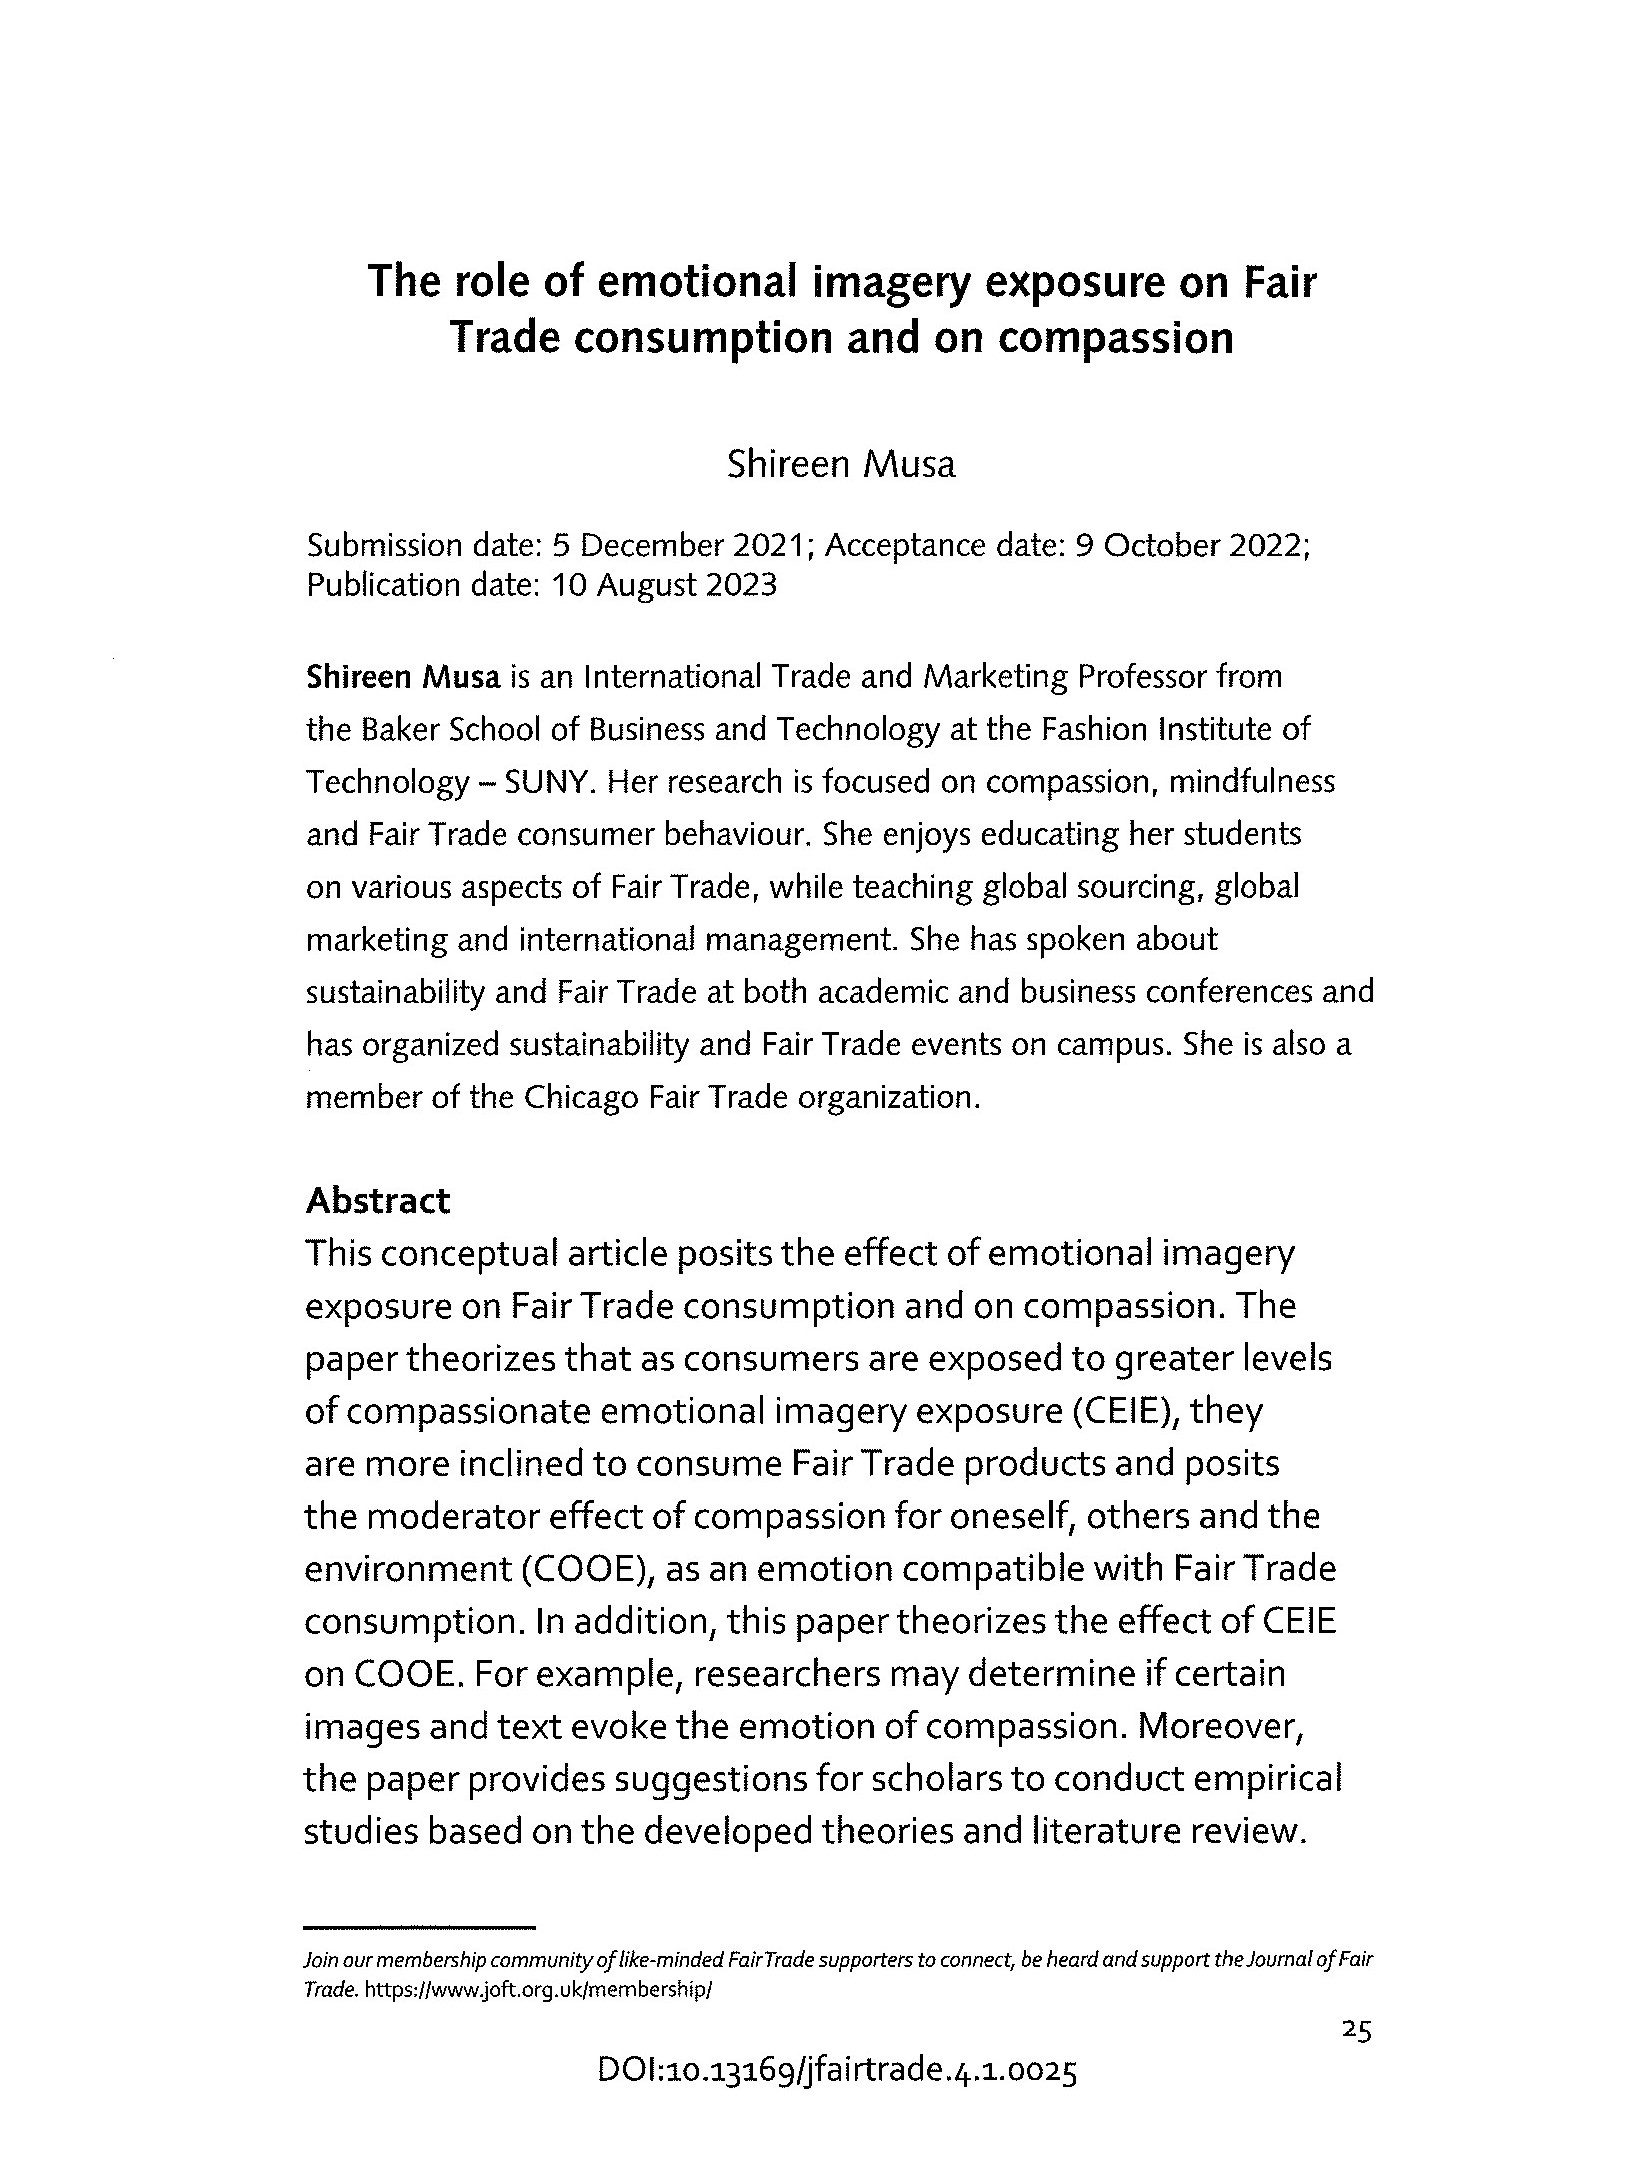 This is the first page of the article titled The Role of Emotional Imagery Exposure on Fair Trade Consumption and on Compassion 